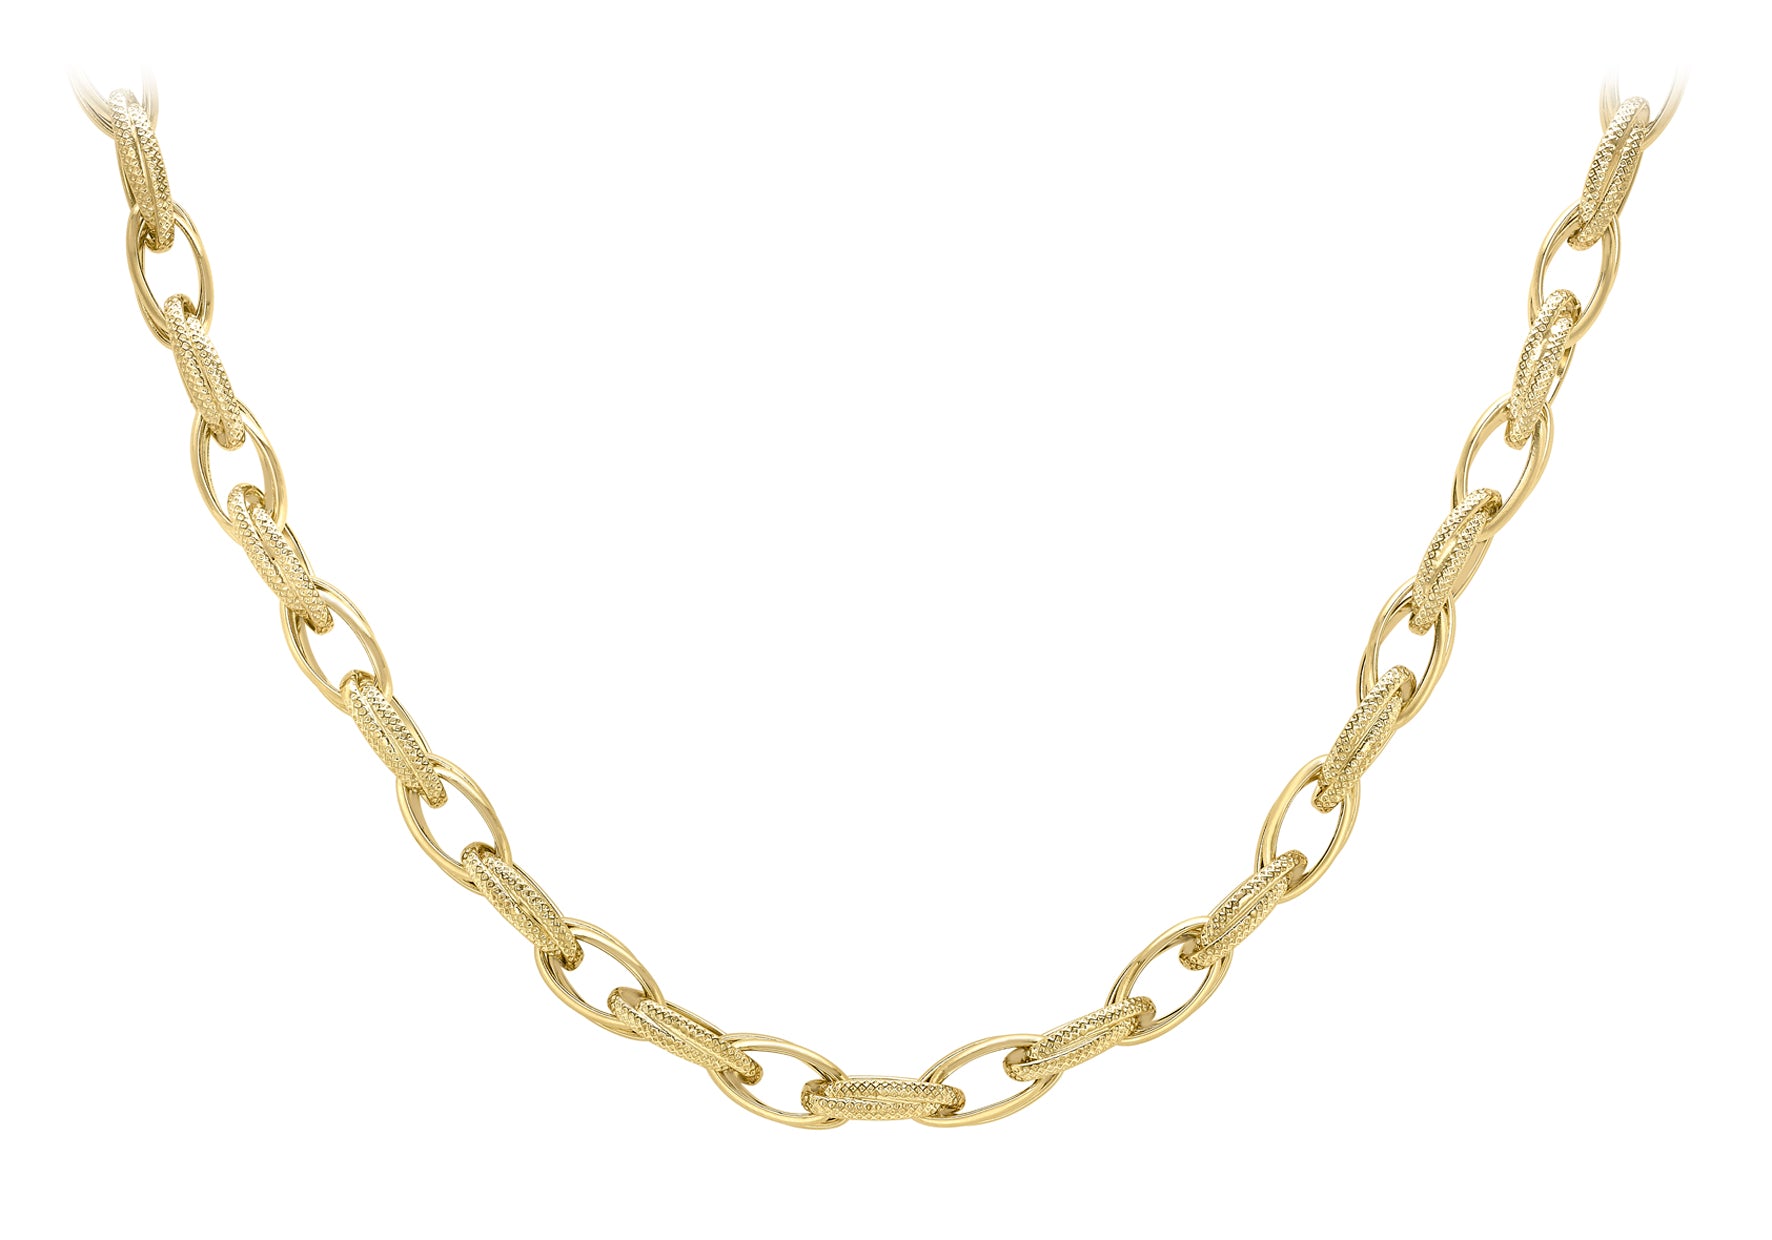 9ct Yellow Gold Textured and Plain Prince of Wales Chain